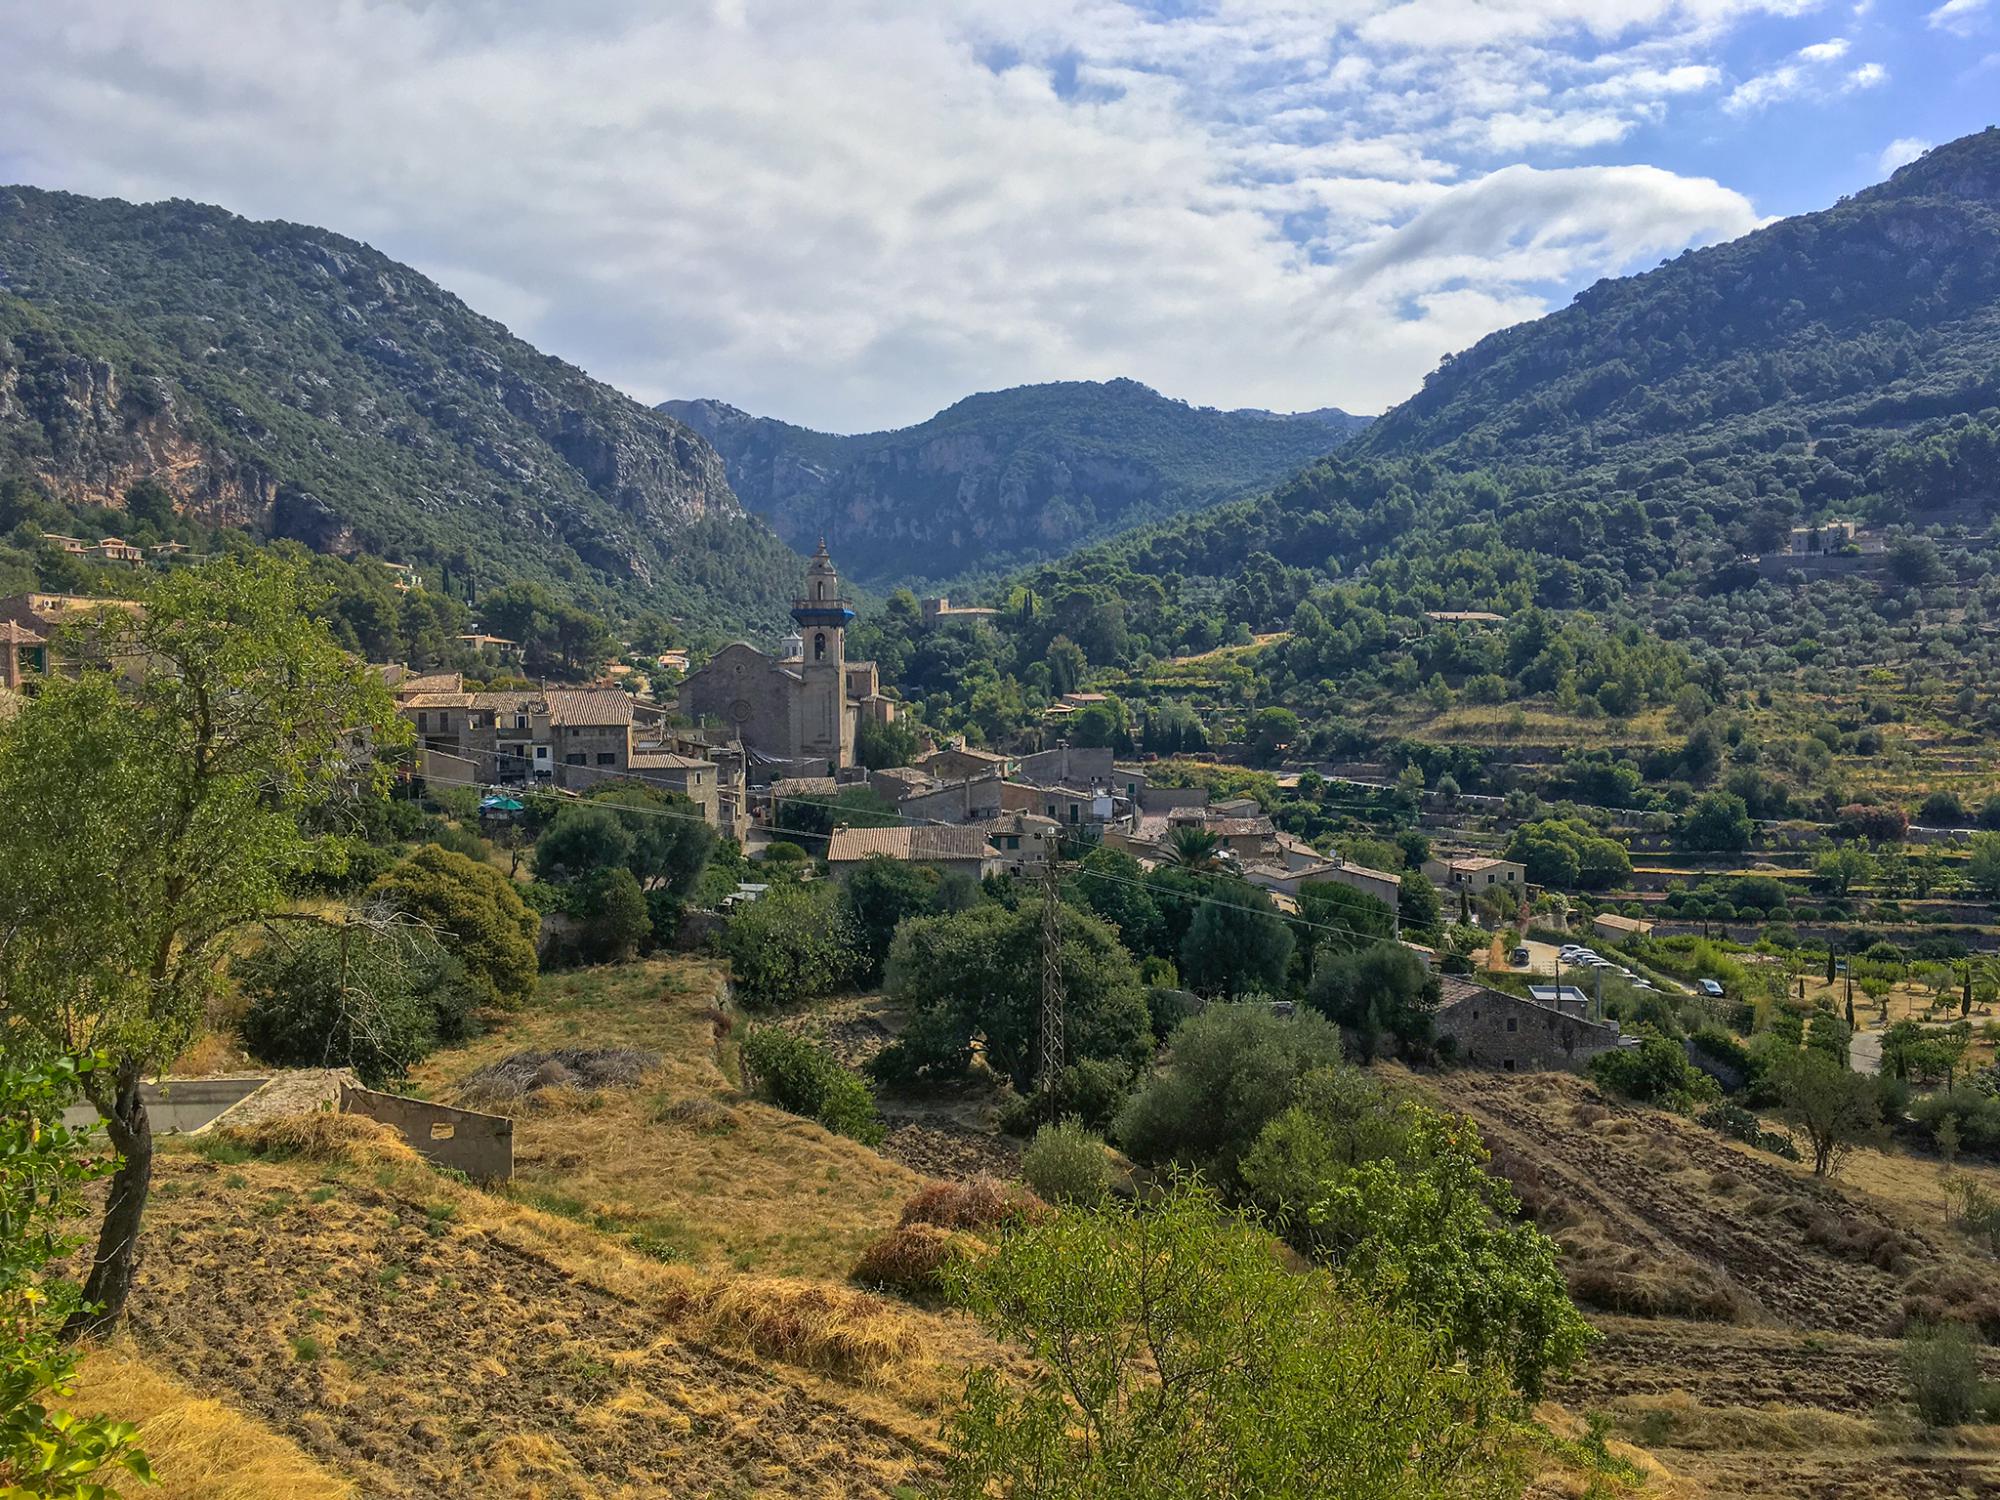 View of the valley in which lies the village of Valldemossa, Mallorca